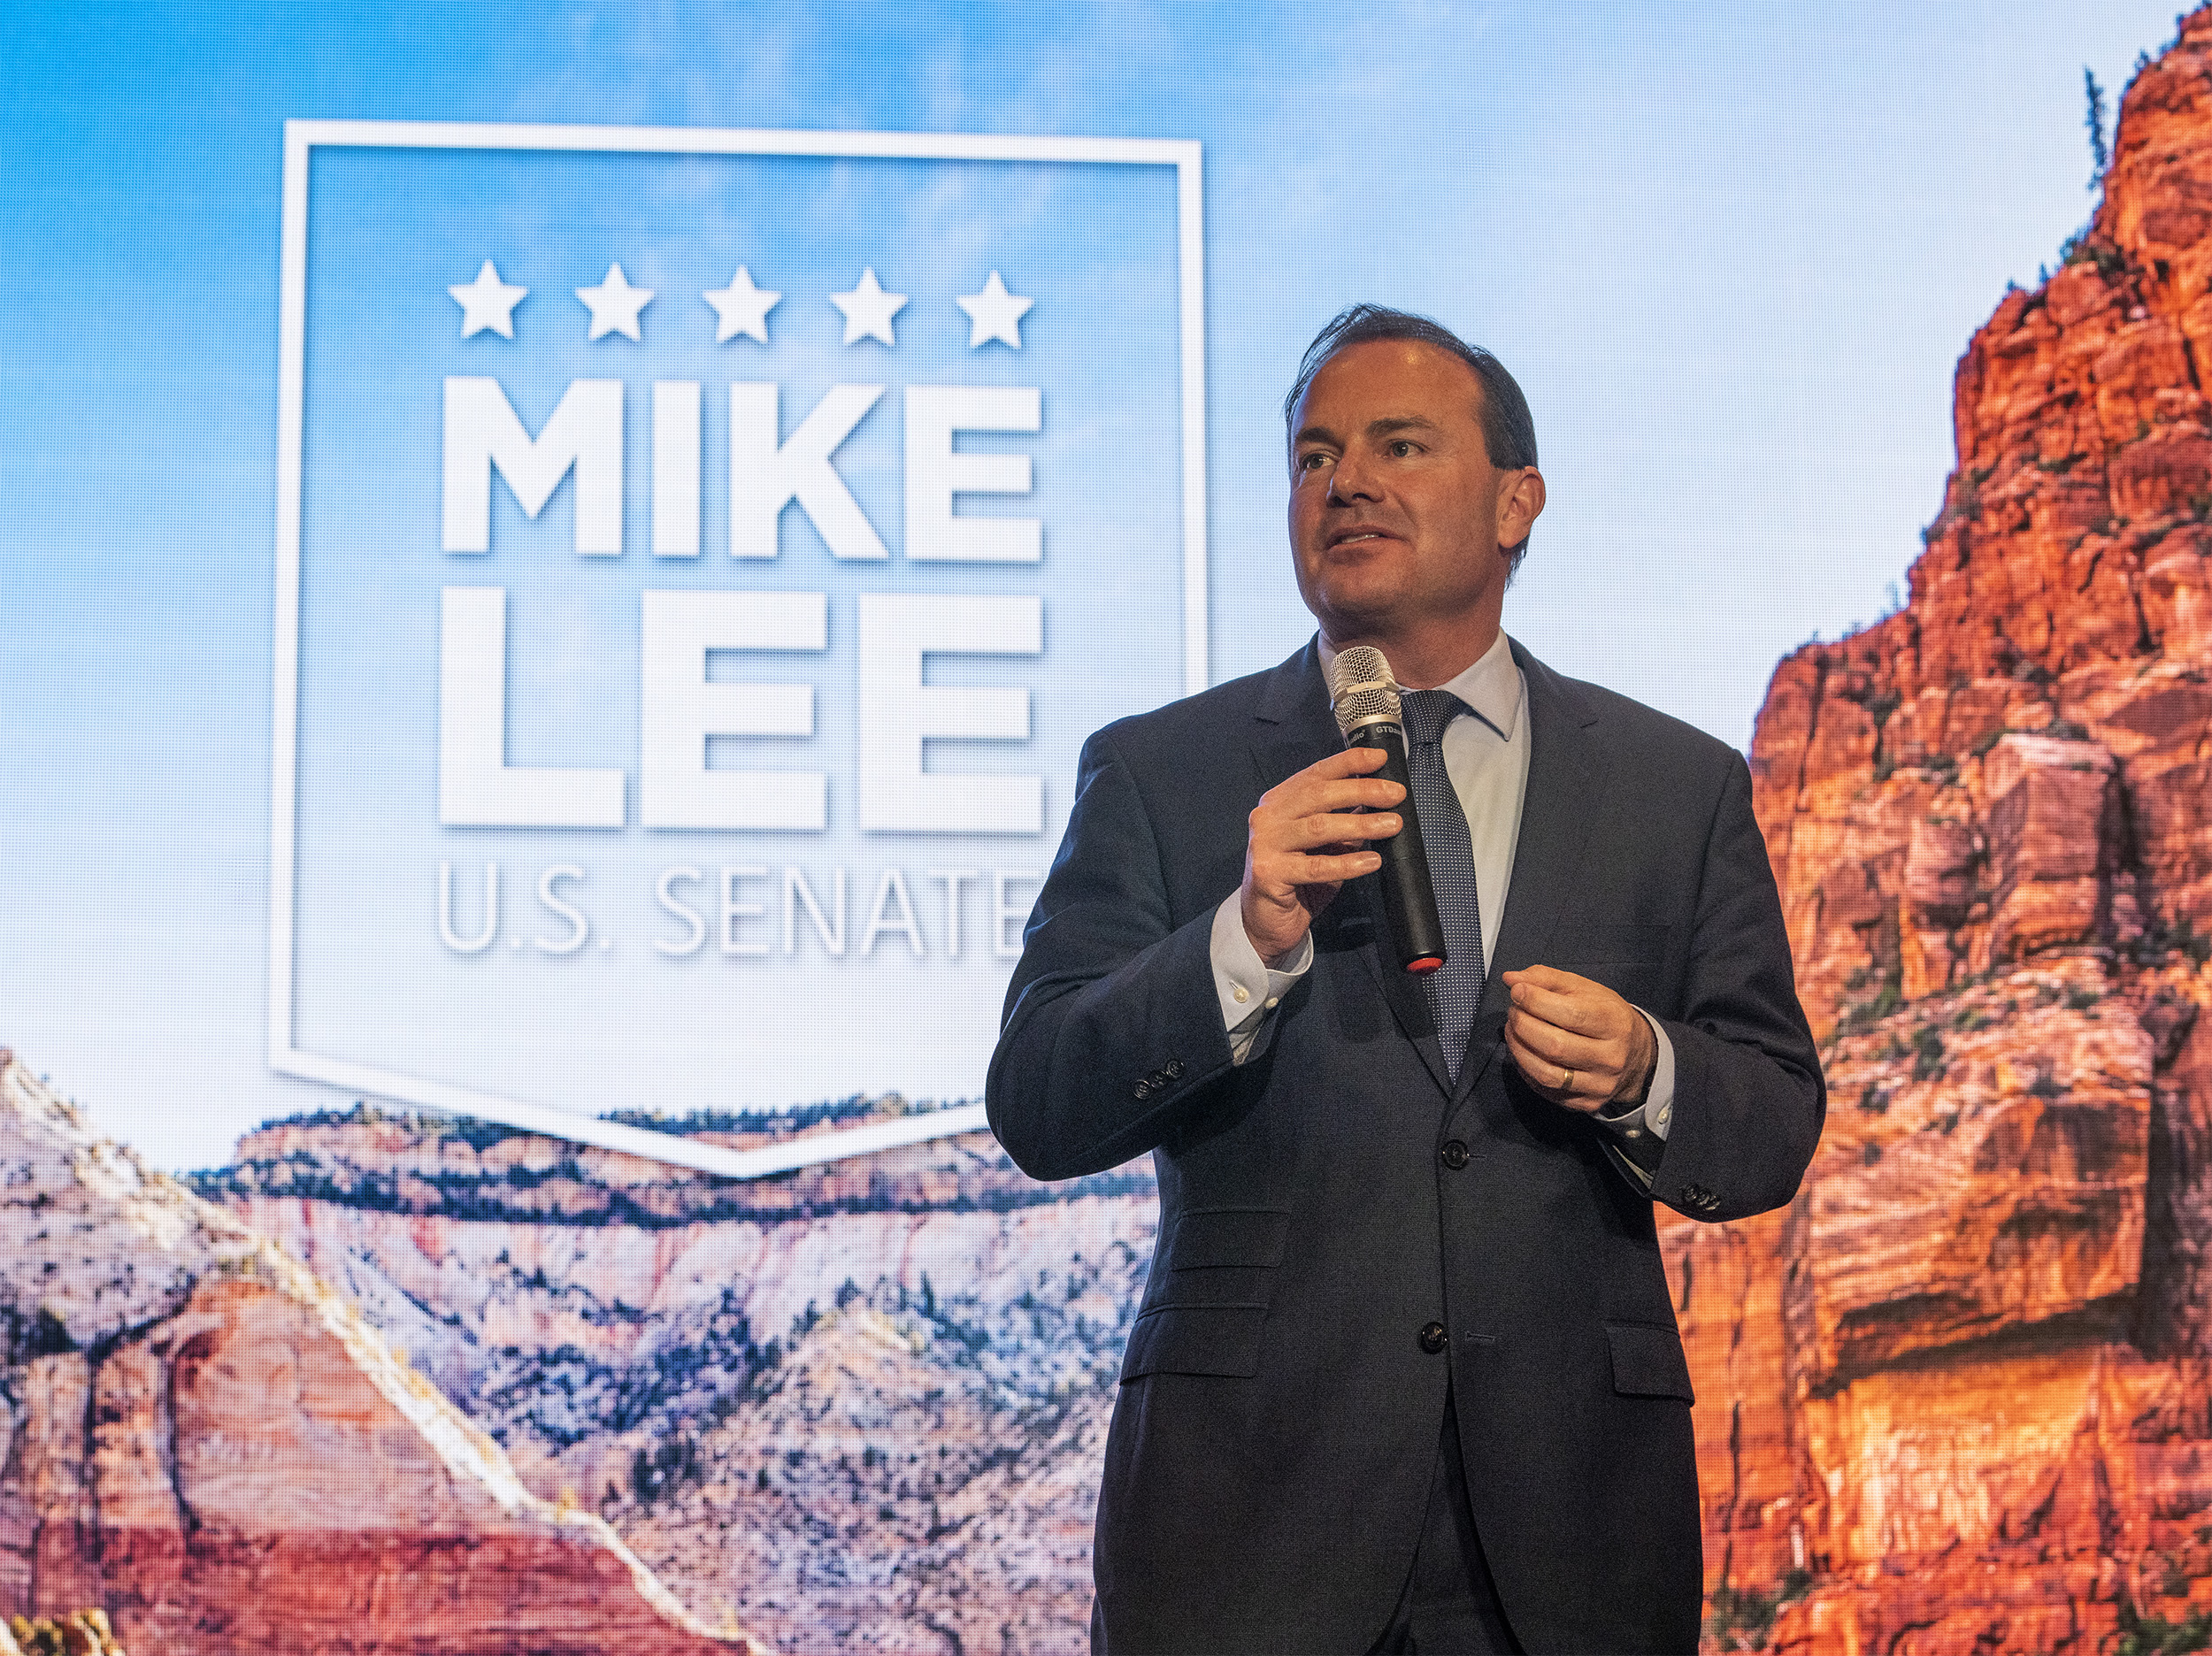 They made the choice for freedom': Sen. Mike Lee celebrates GOP primary win  over Edwards and Isom